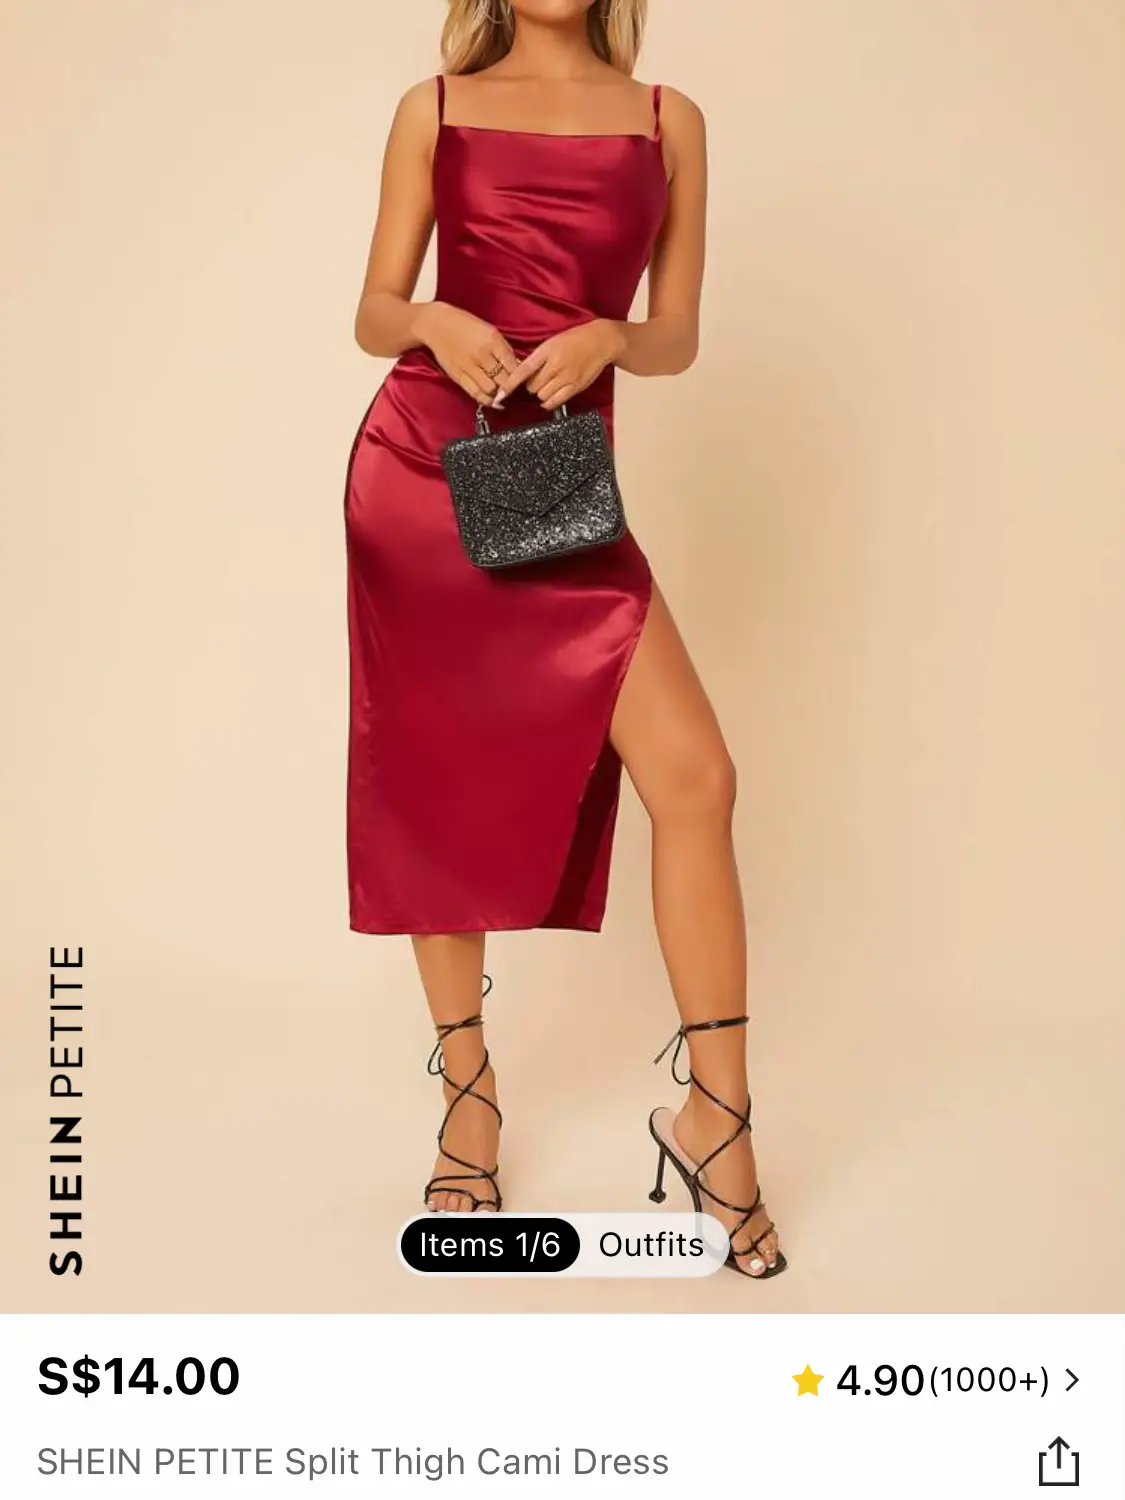 Vintage Store Sells Shein Dress for $129